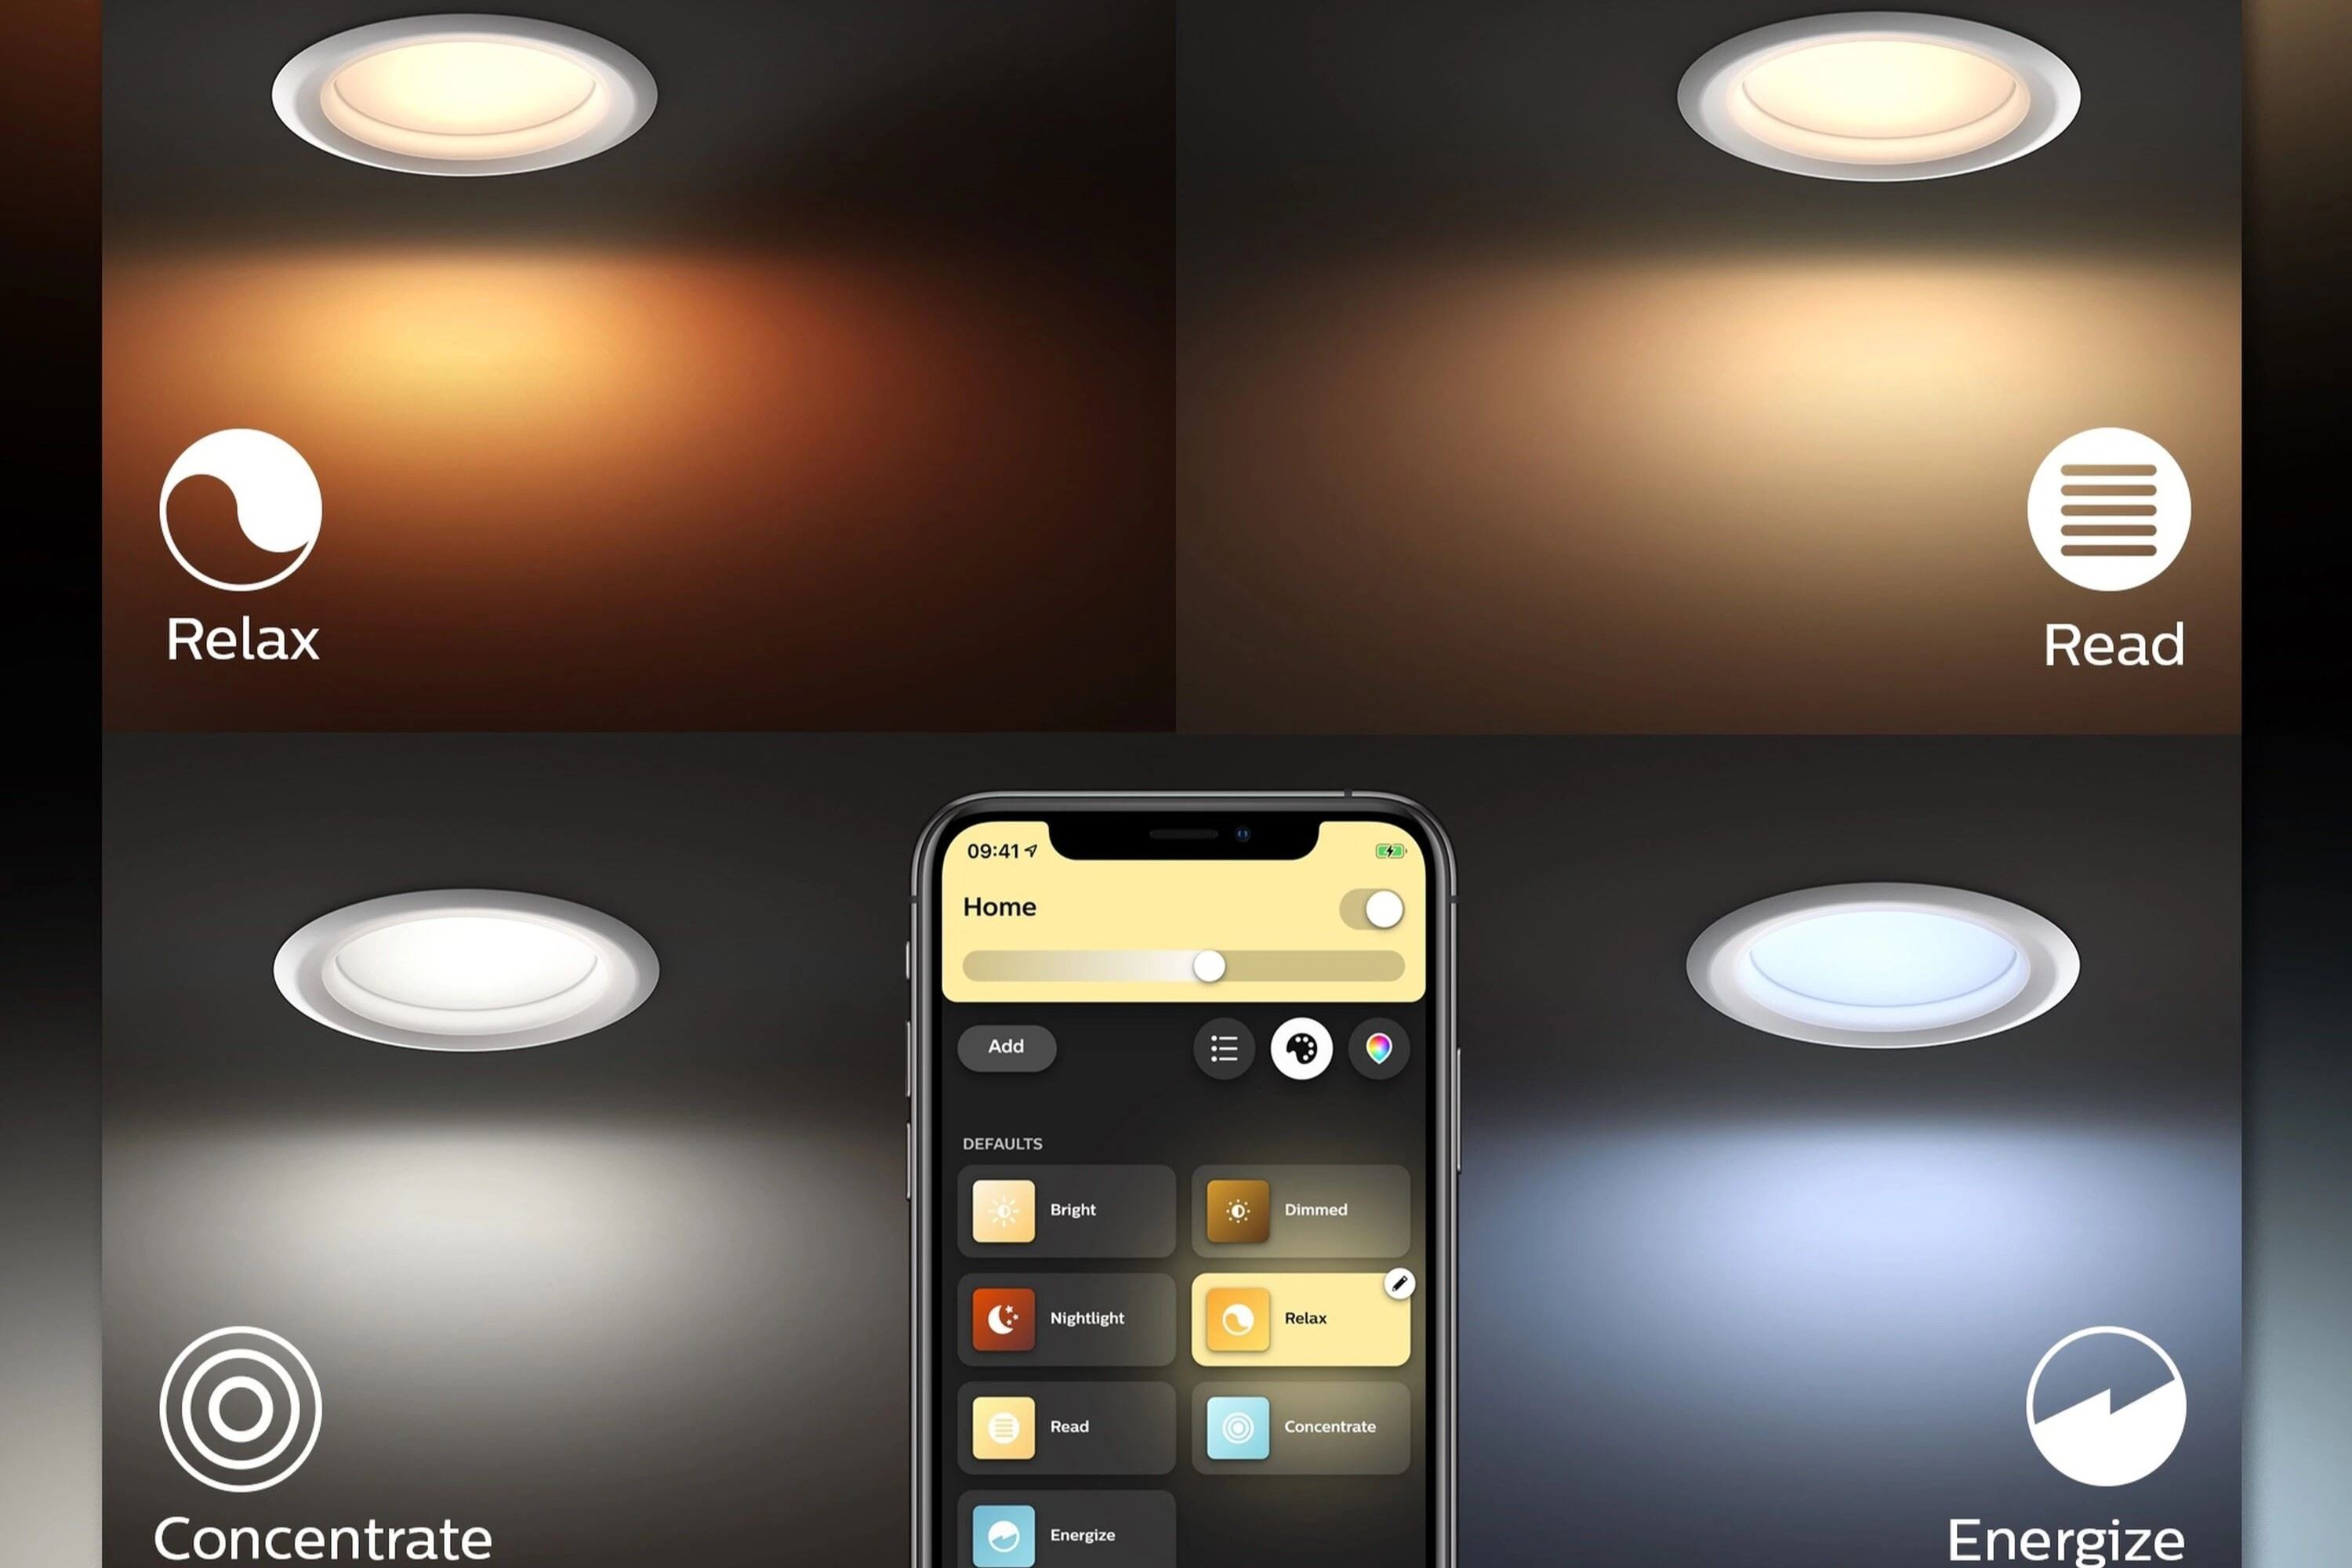 How To Adjust Warmth Of Philips Hue